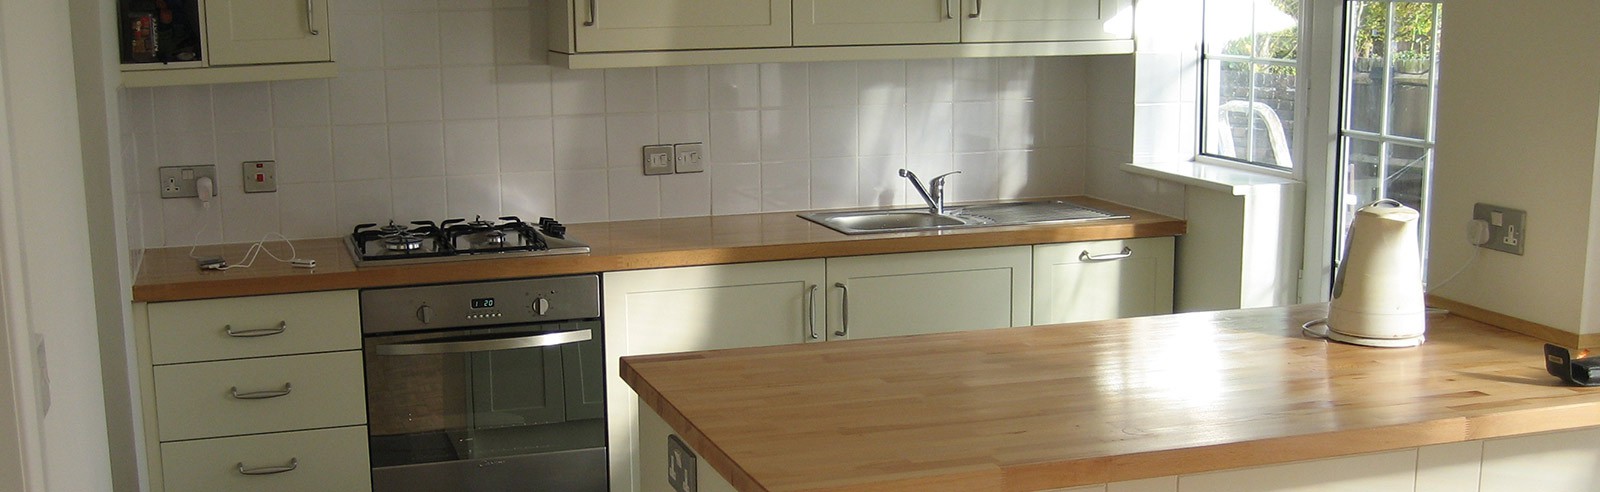 Specialists in Kitchens